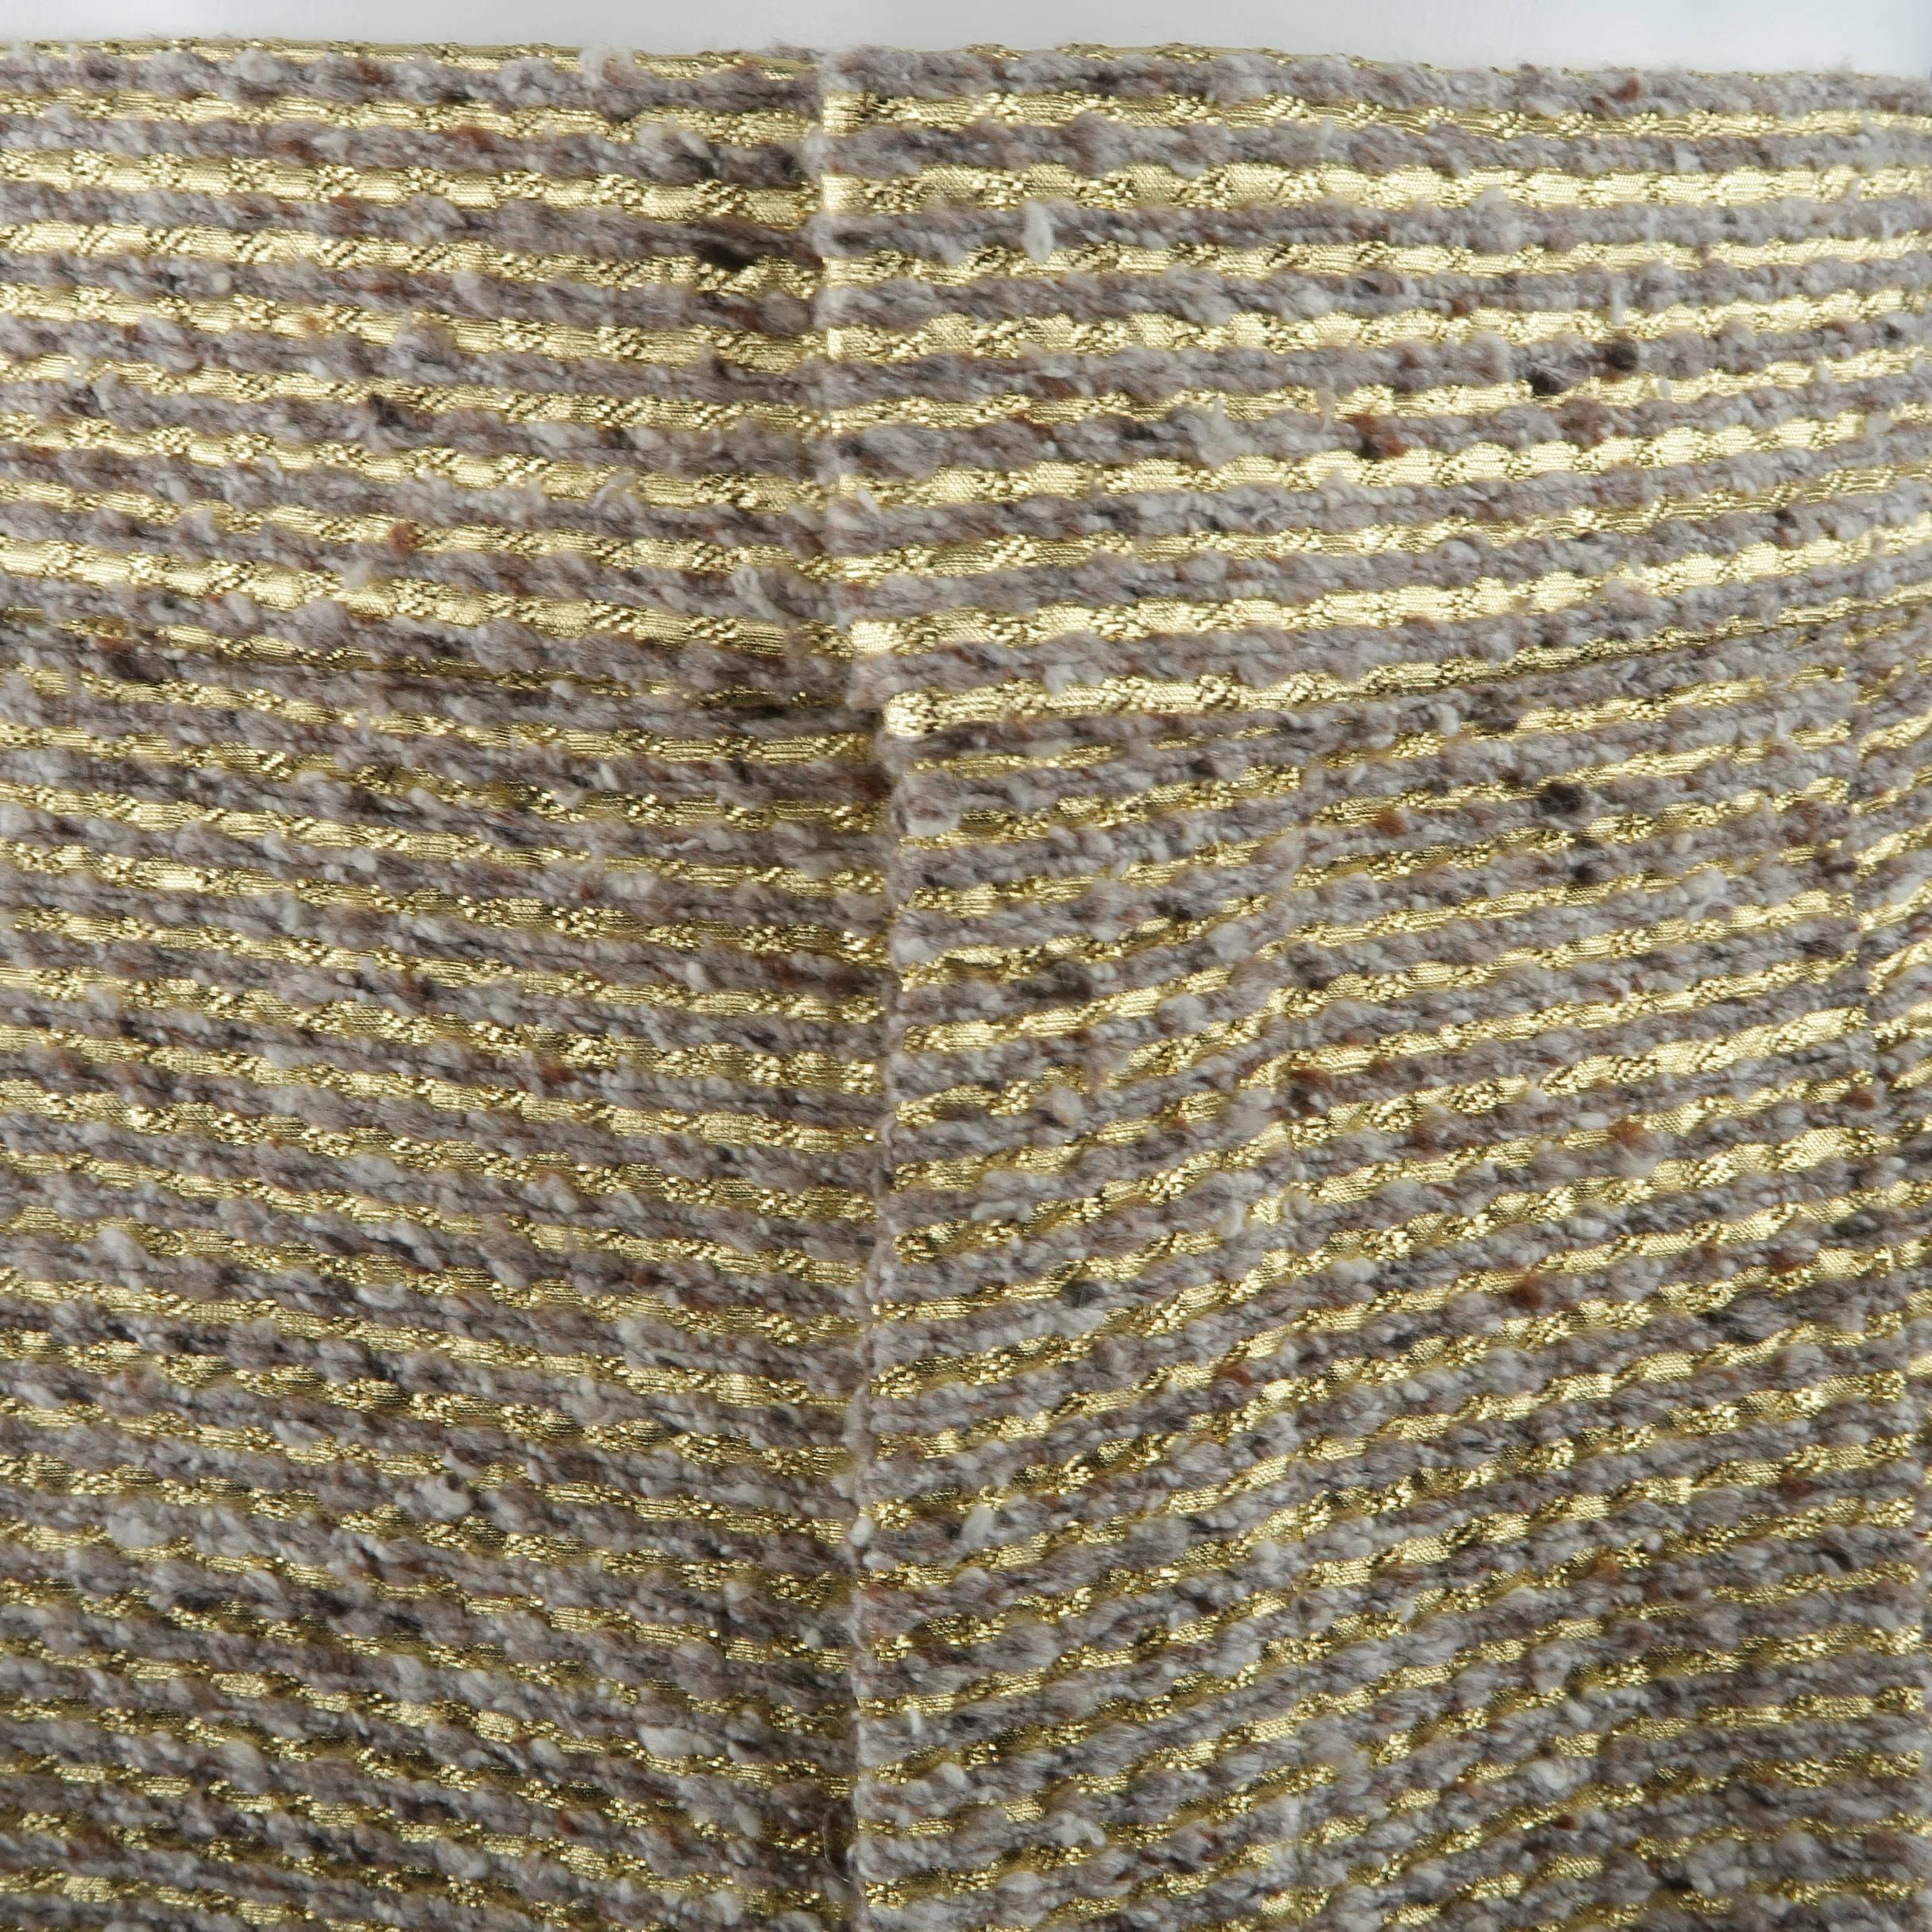 CHLOE dress shorts come in a beige & metallic gold striped tweed fabric with a high rise and single pleat front.
 
Excellent Pre-Owned Condition.
Marked: EU 36
 
Measurements:
 
Waist: 14 in.
Rise: 13 in.
Length: 4 in.
Leg Opening: 26 in.


SKU: